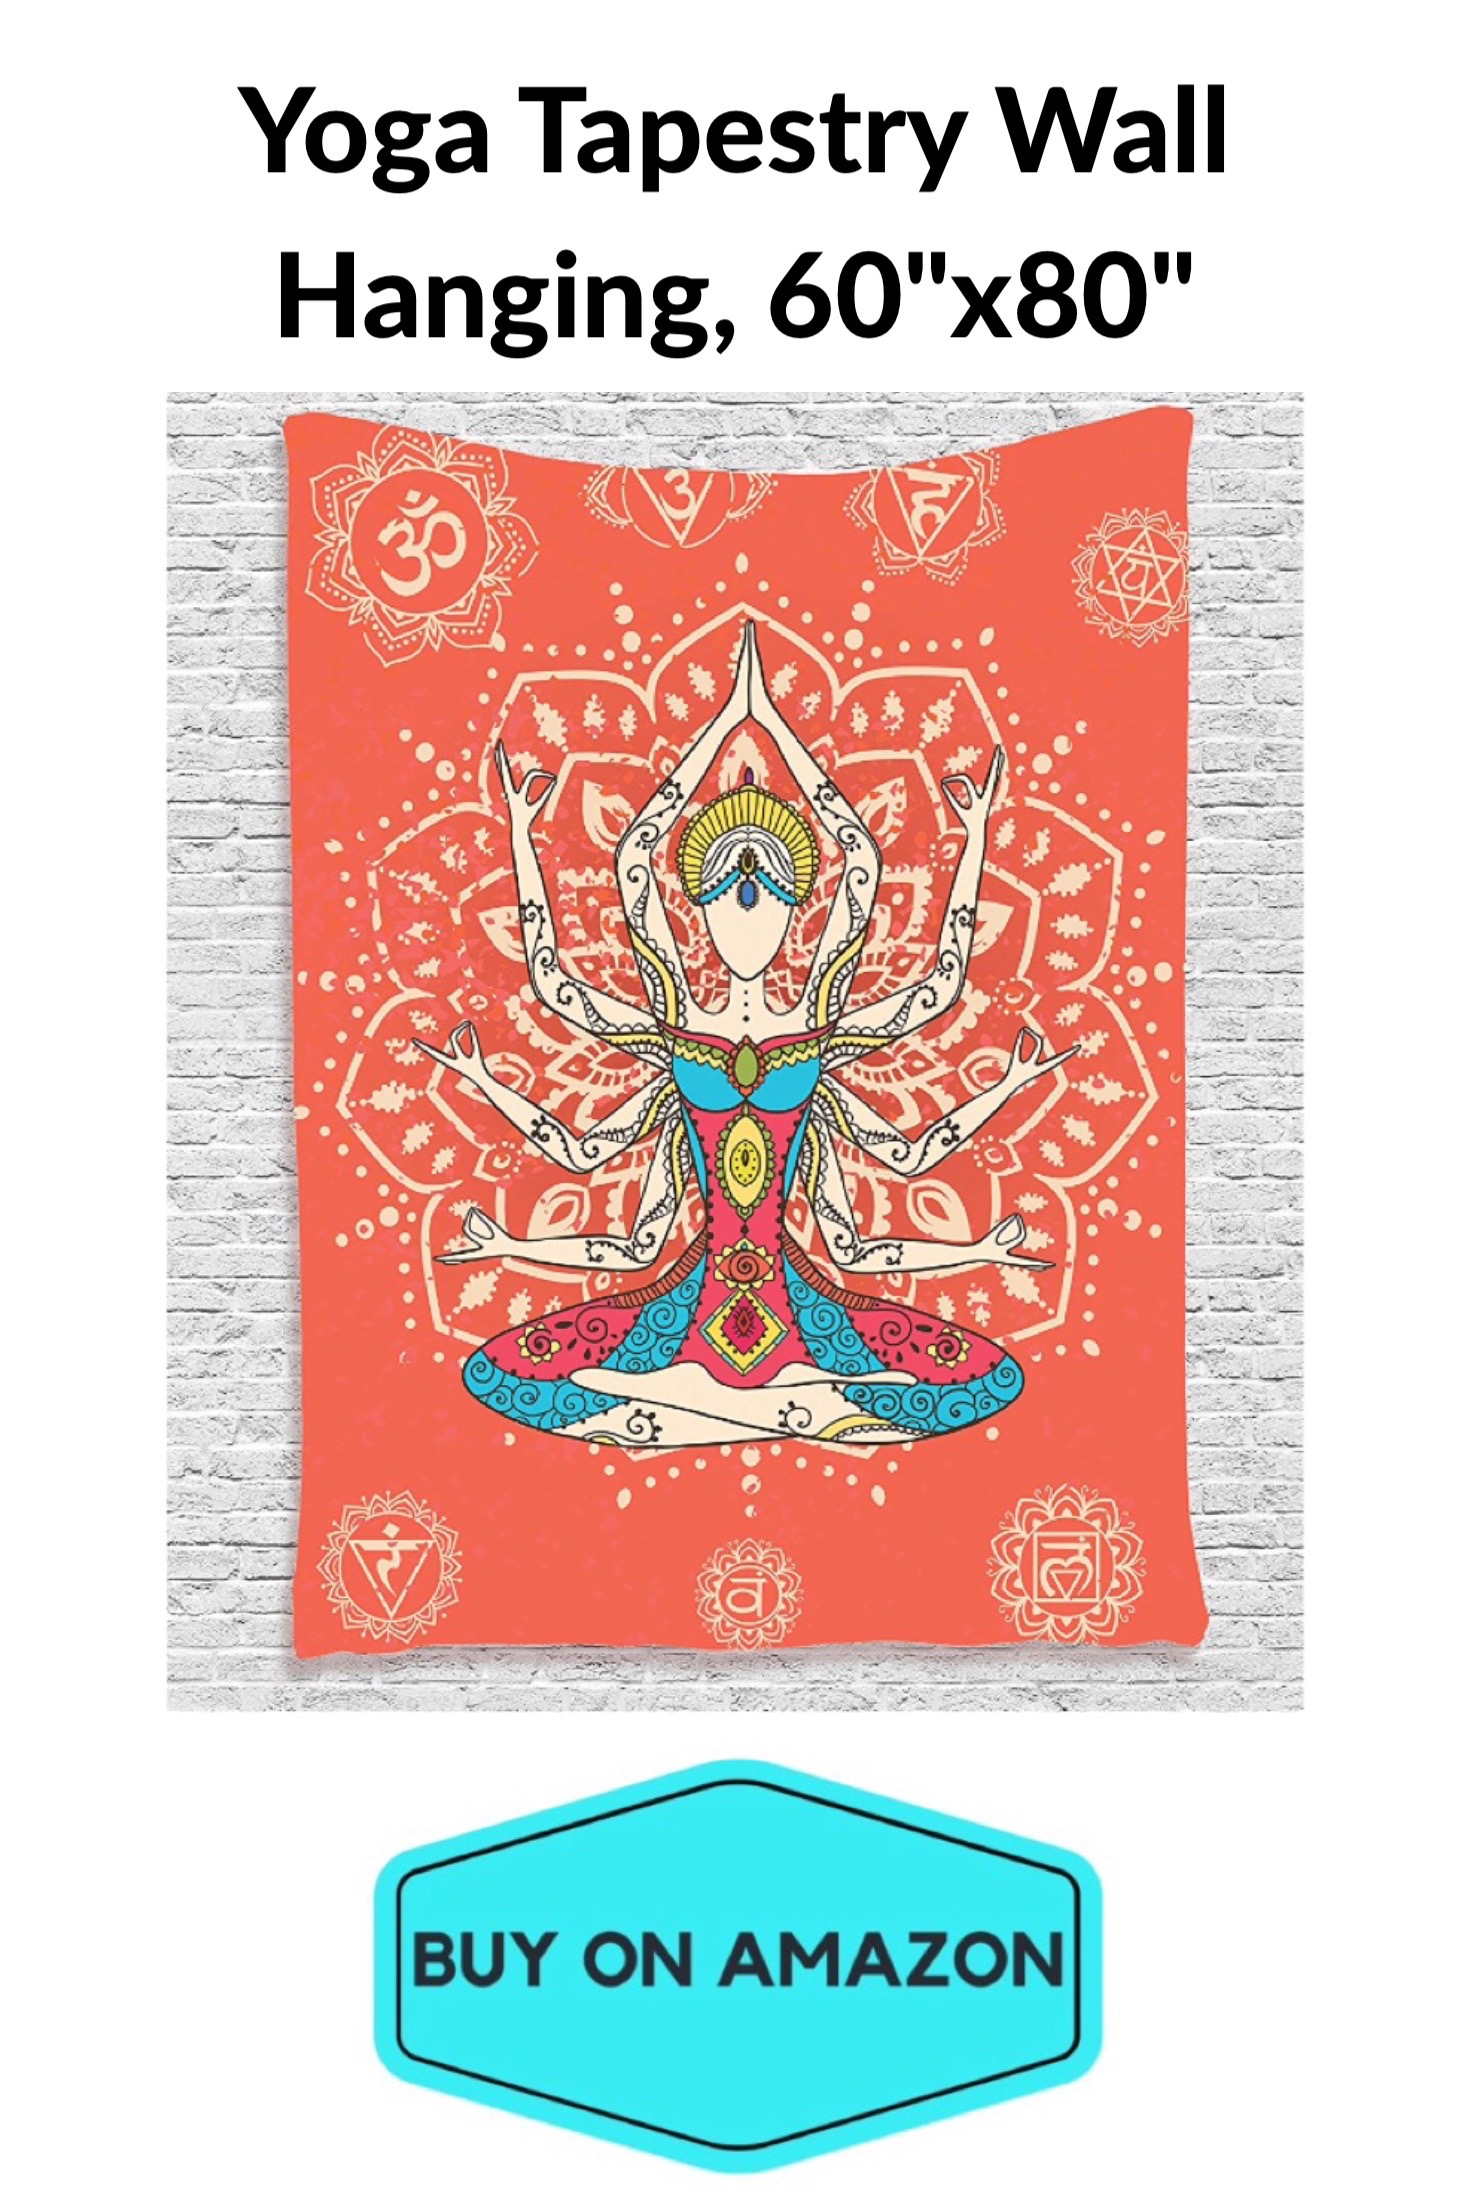 Yoga Tapestry Wall Hanging 60" x 80"